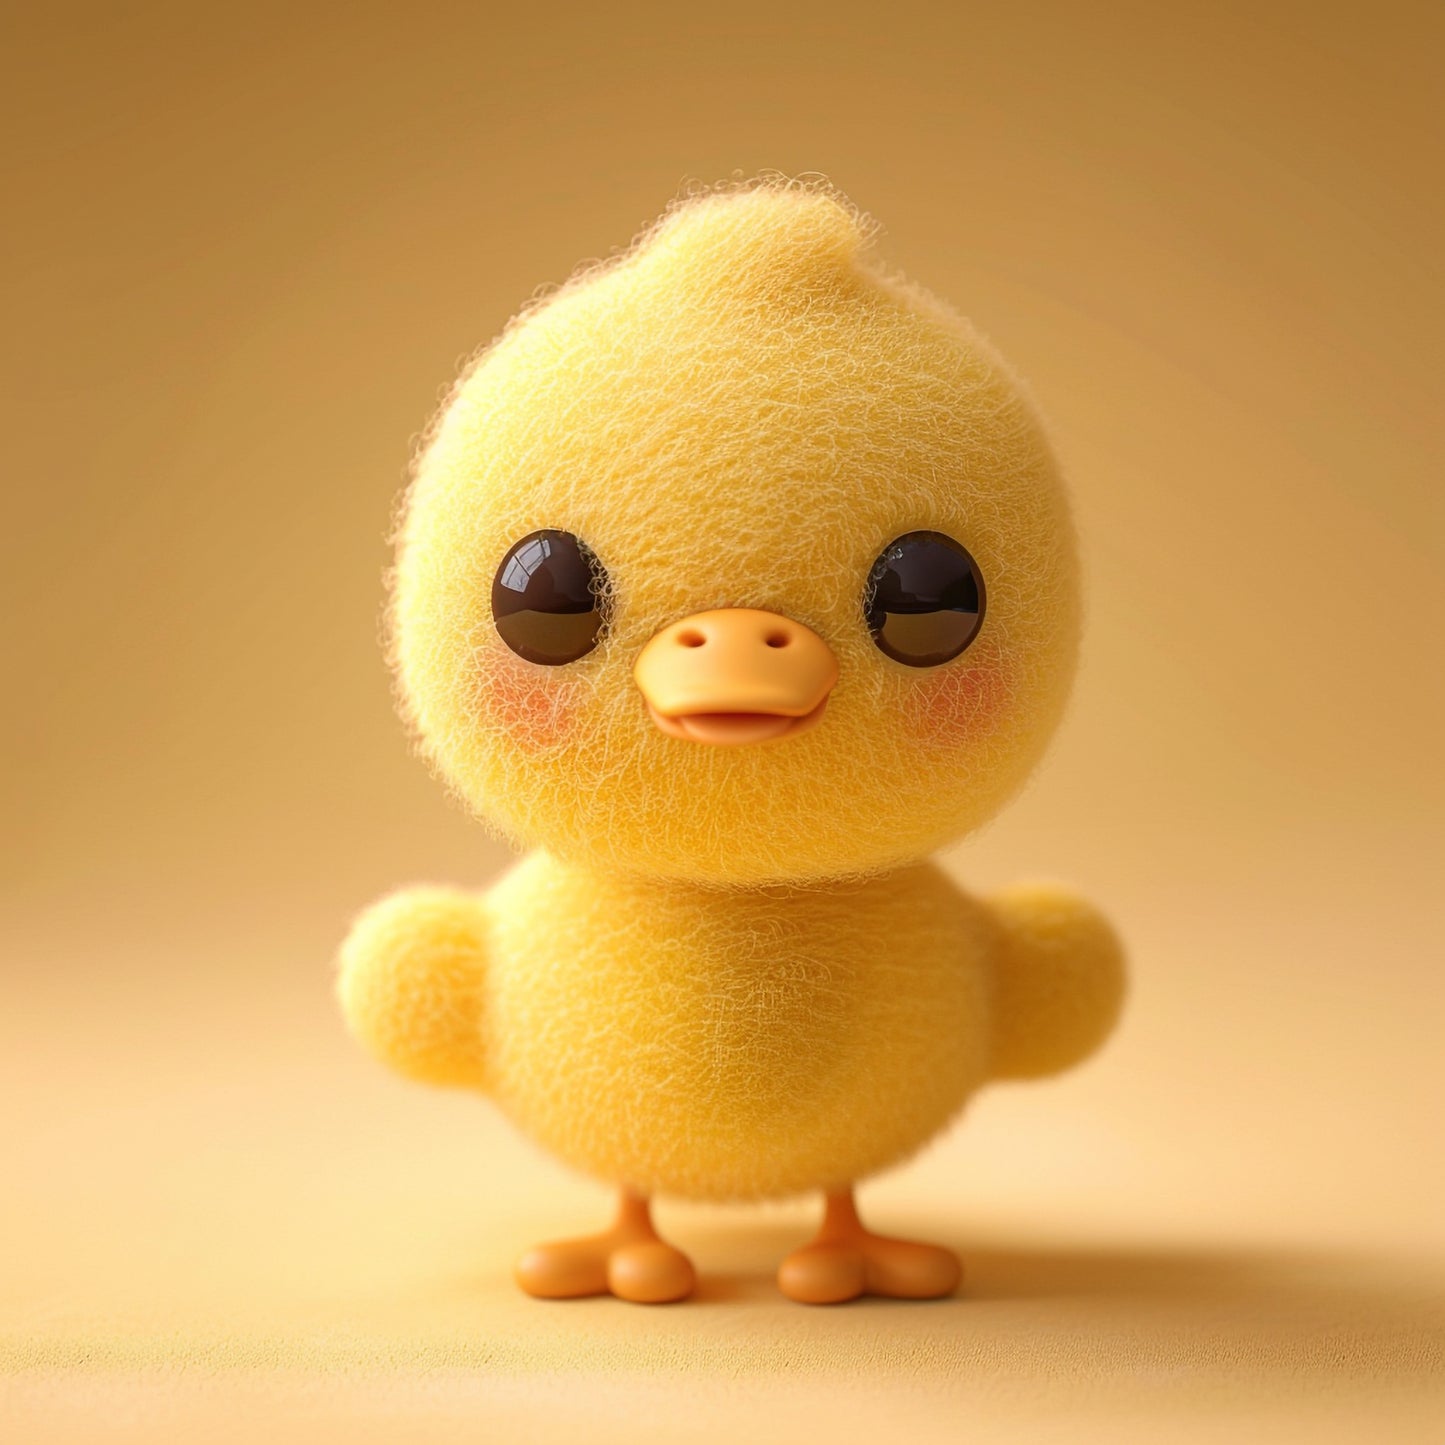 Adorable Needle Felted Duck on a Warm Background